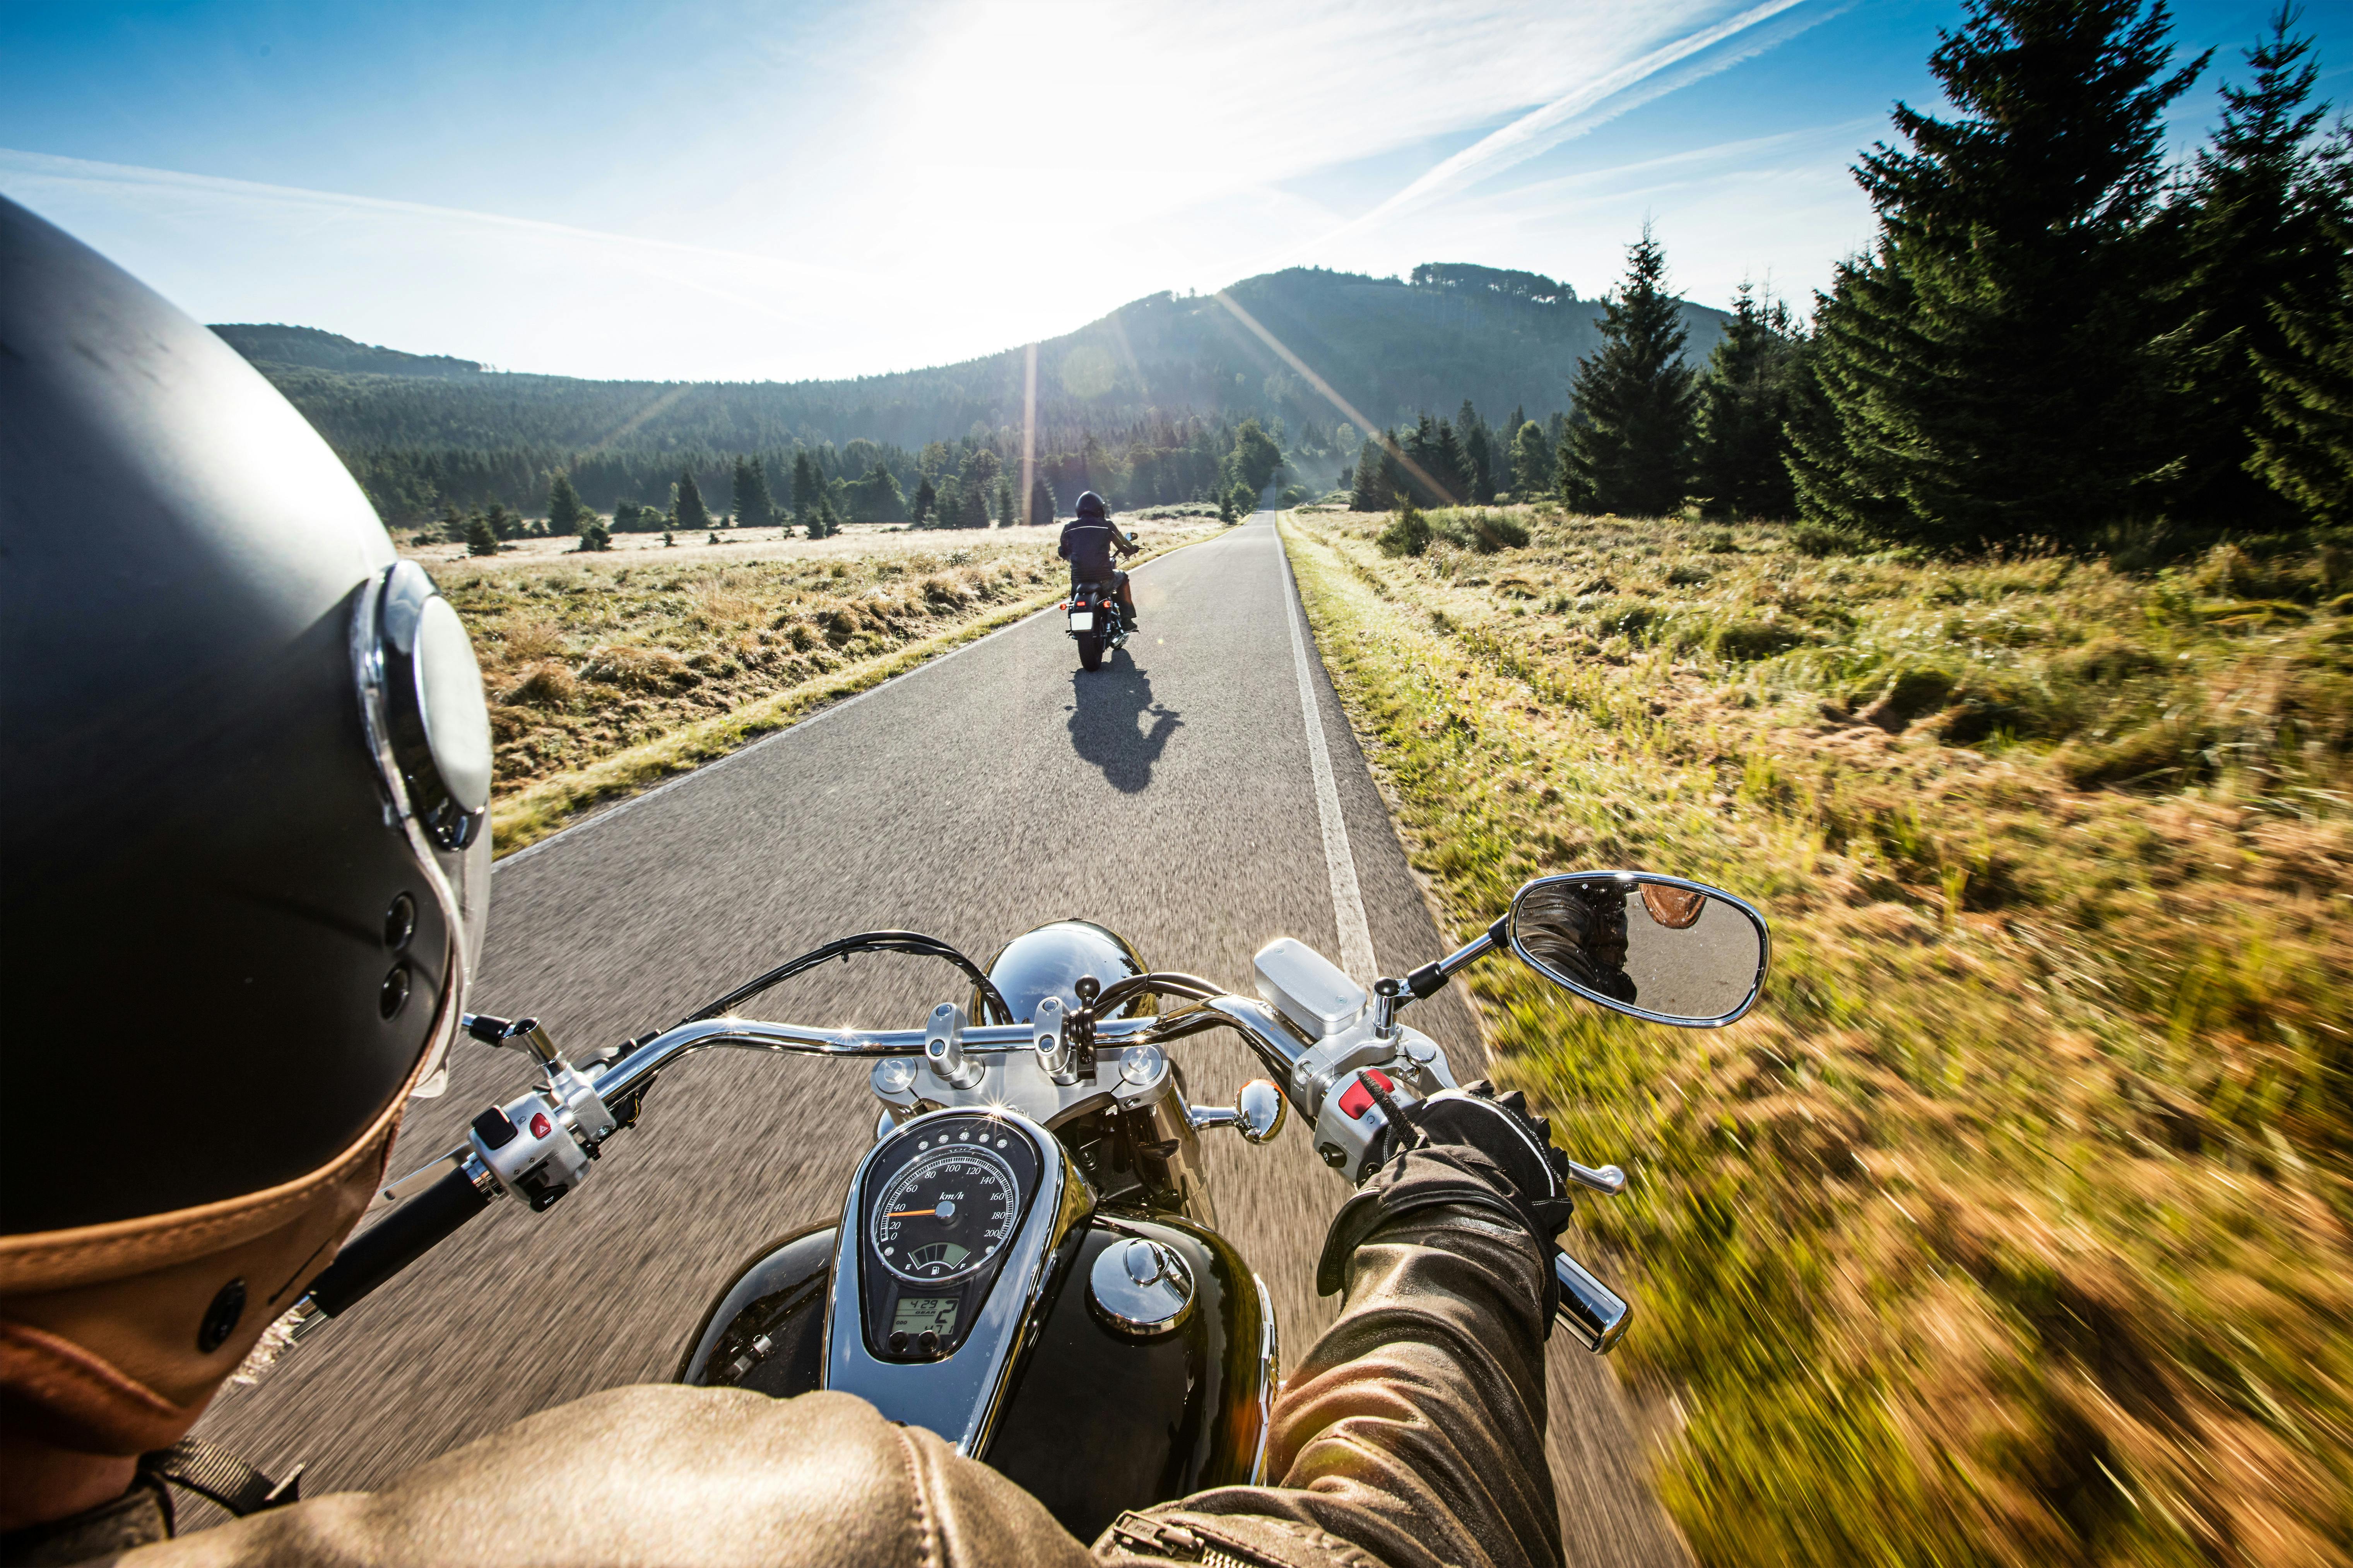 Two people on motorcycles riding on a scenic road through the wilderness on a sunny day